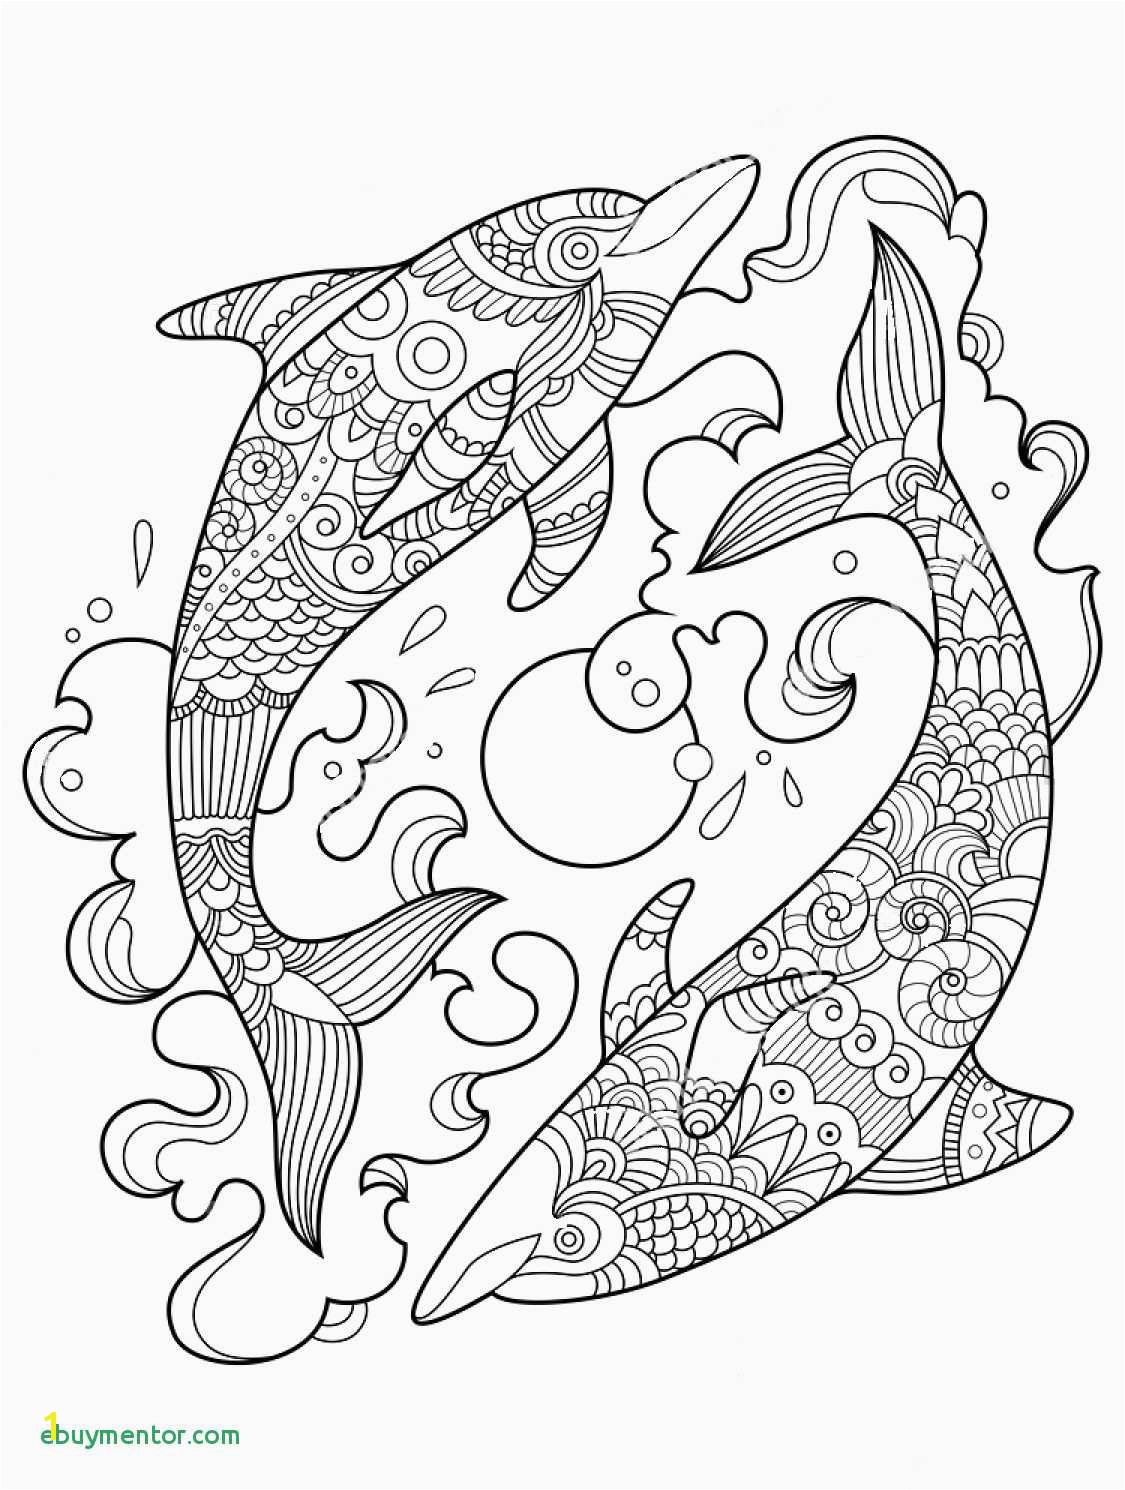 Baby Cupid Coloring Pages Best Awesome Coloring Pages Dolphins Scheme Printable Coloring Pages